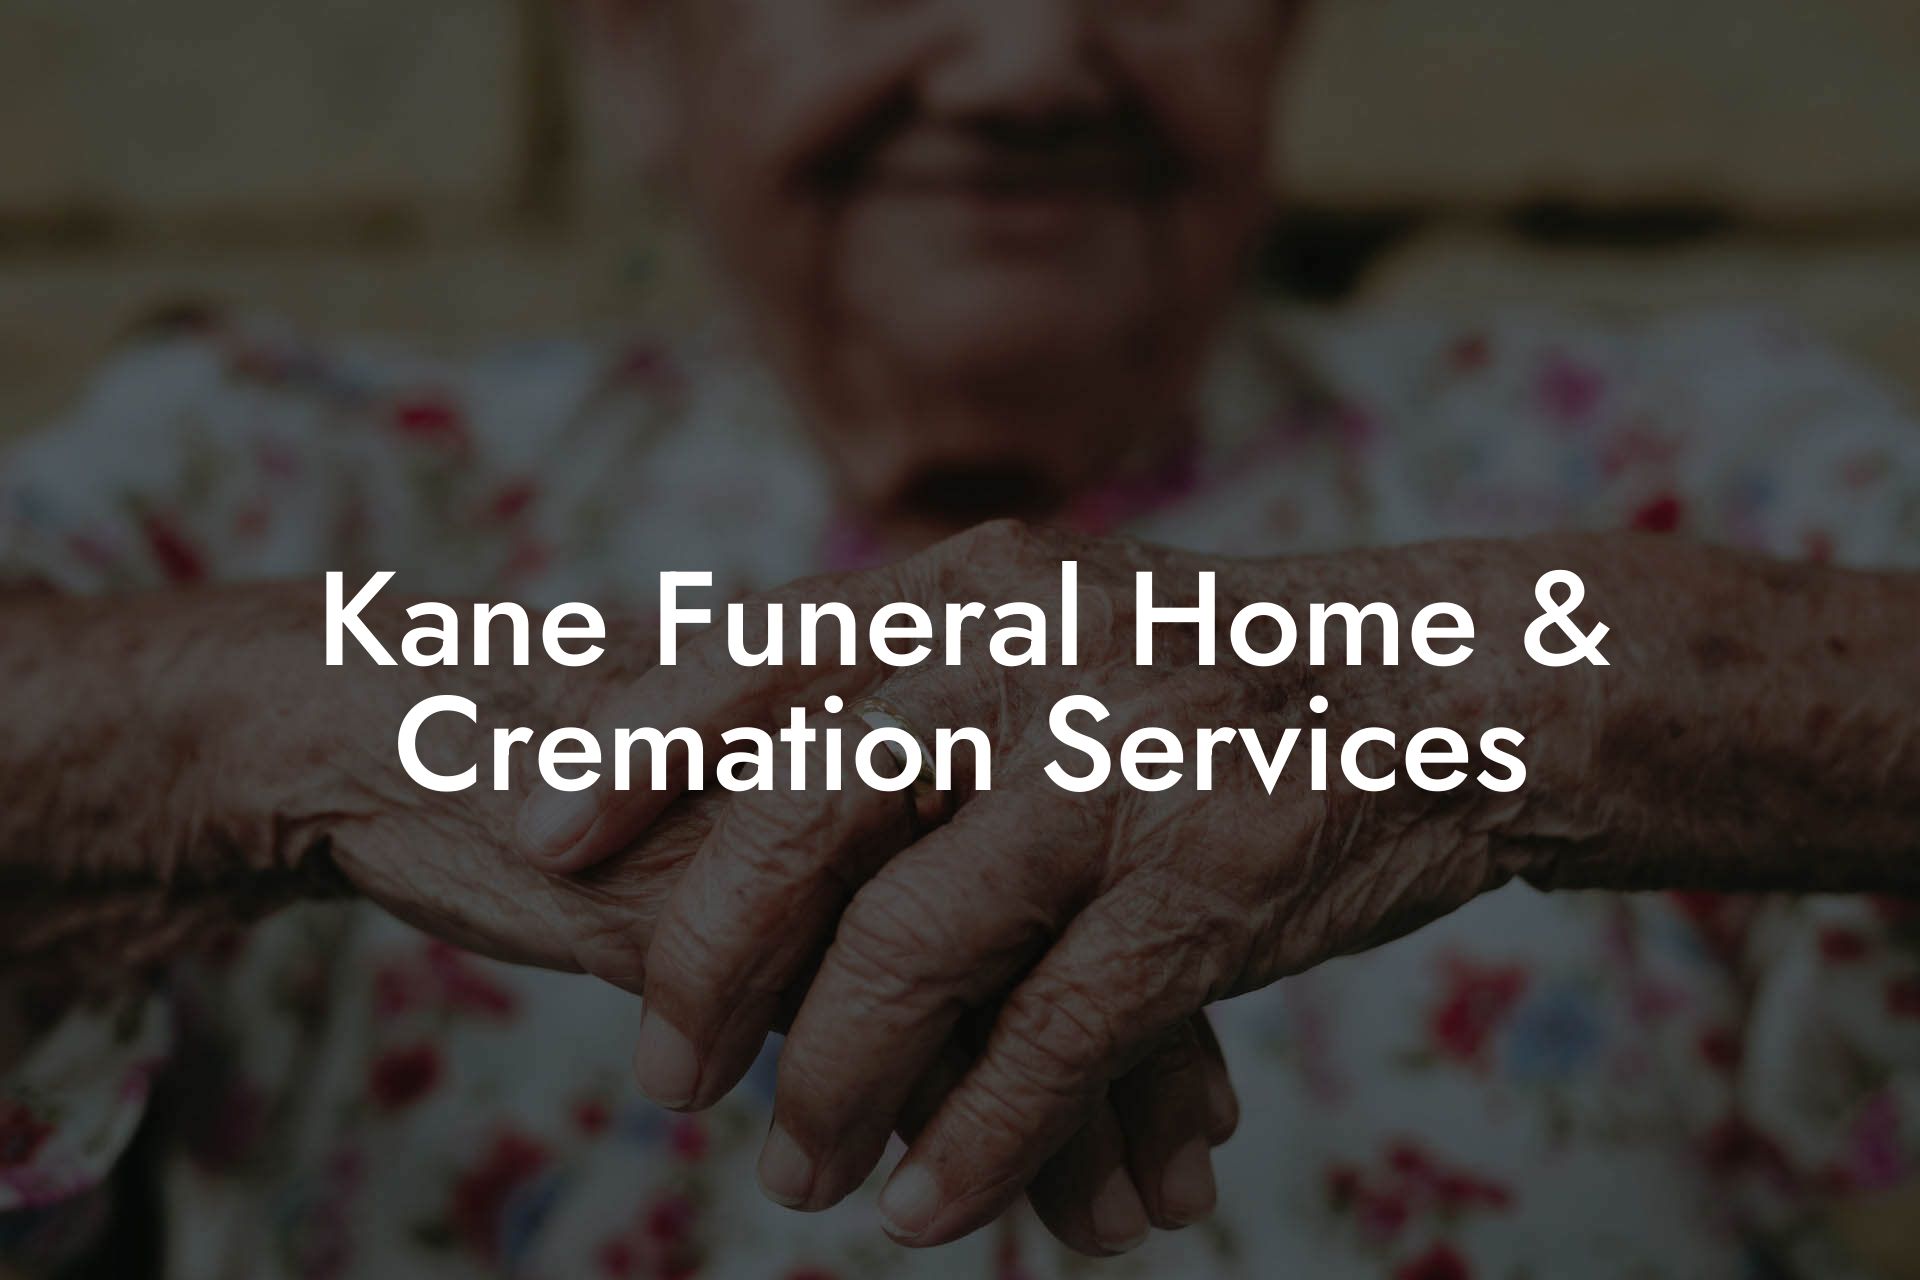 Kane Funeral Home & Cremation Services